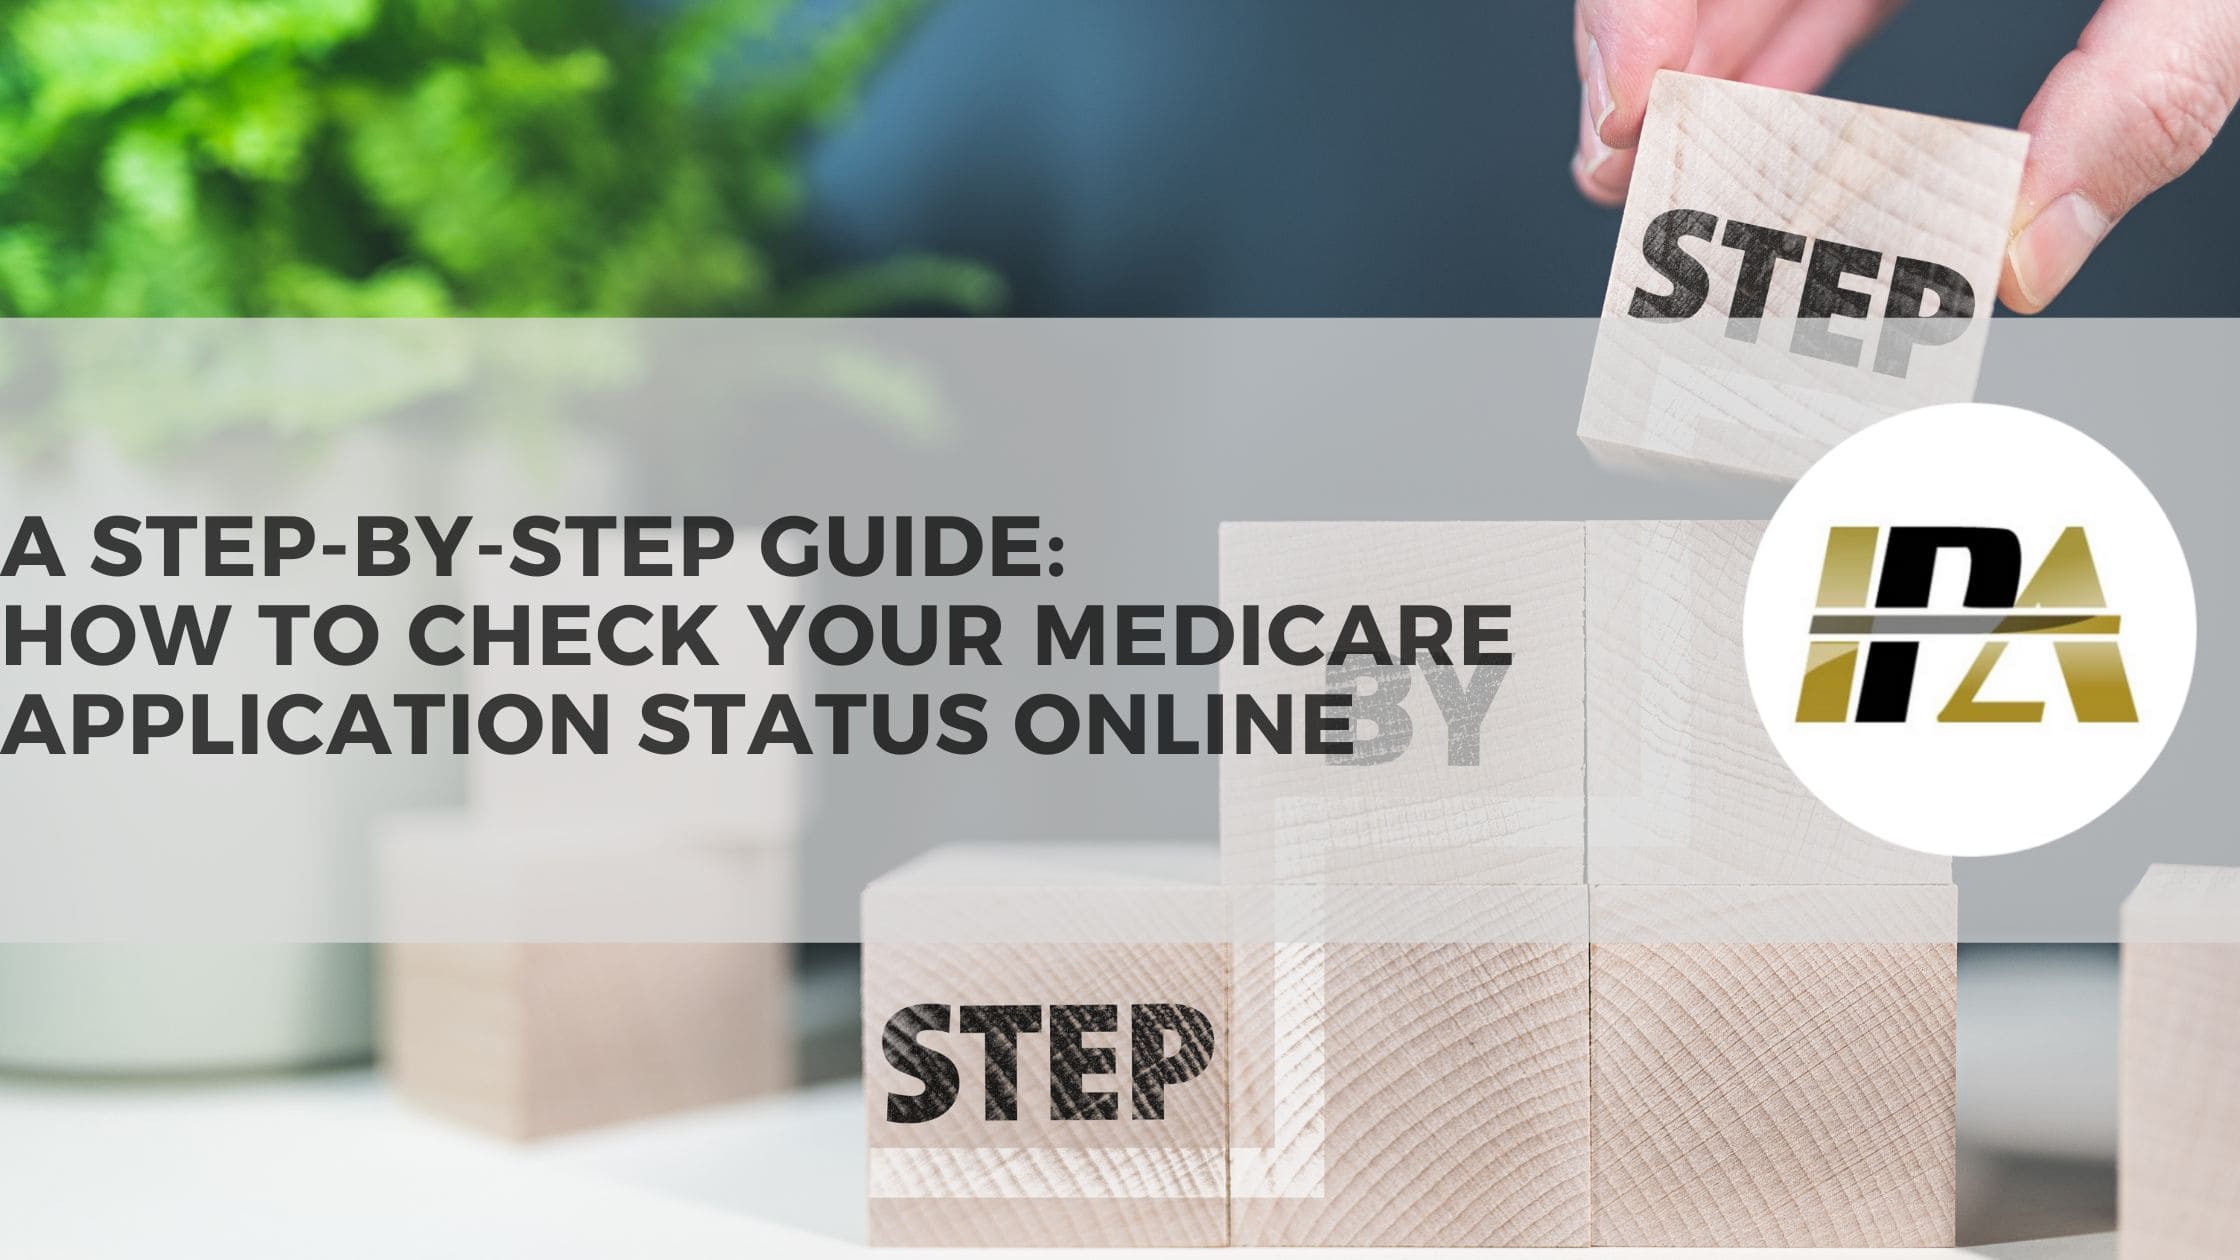 How to Check Your Medicare Application Status Online